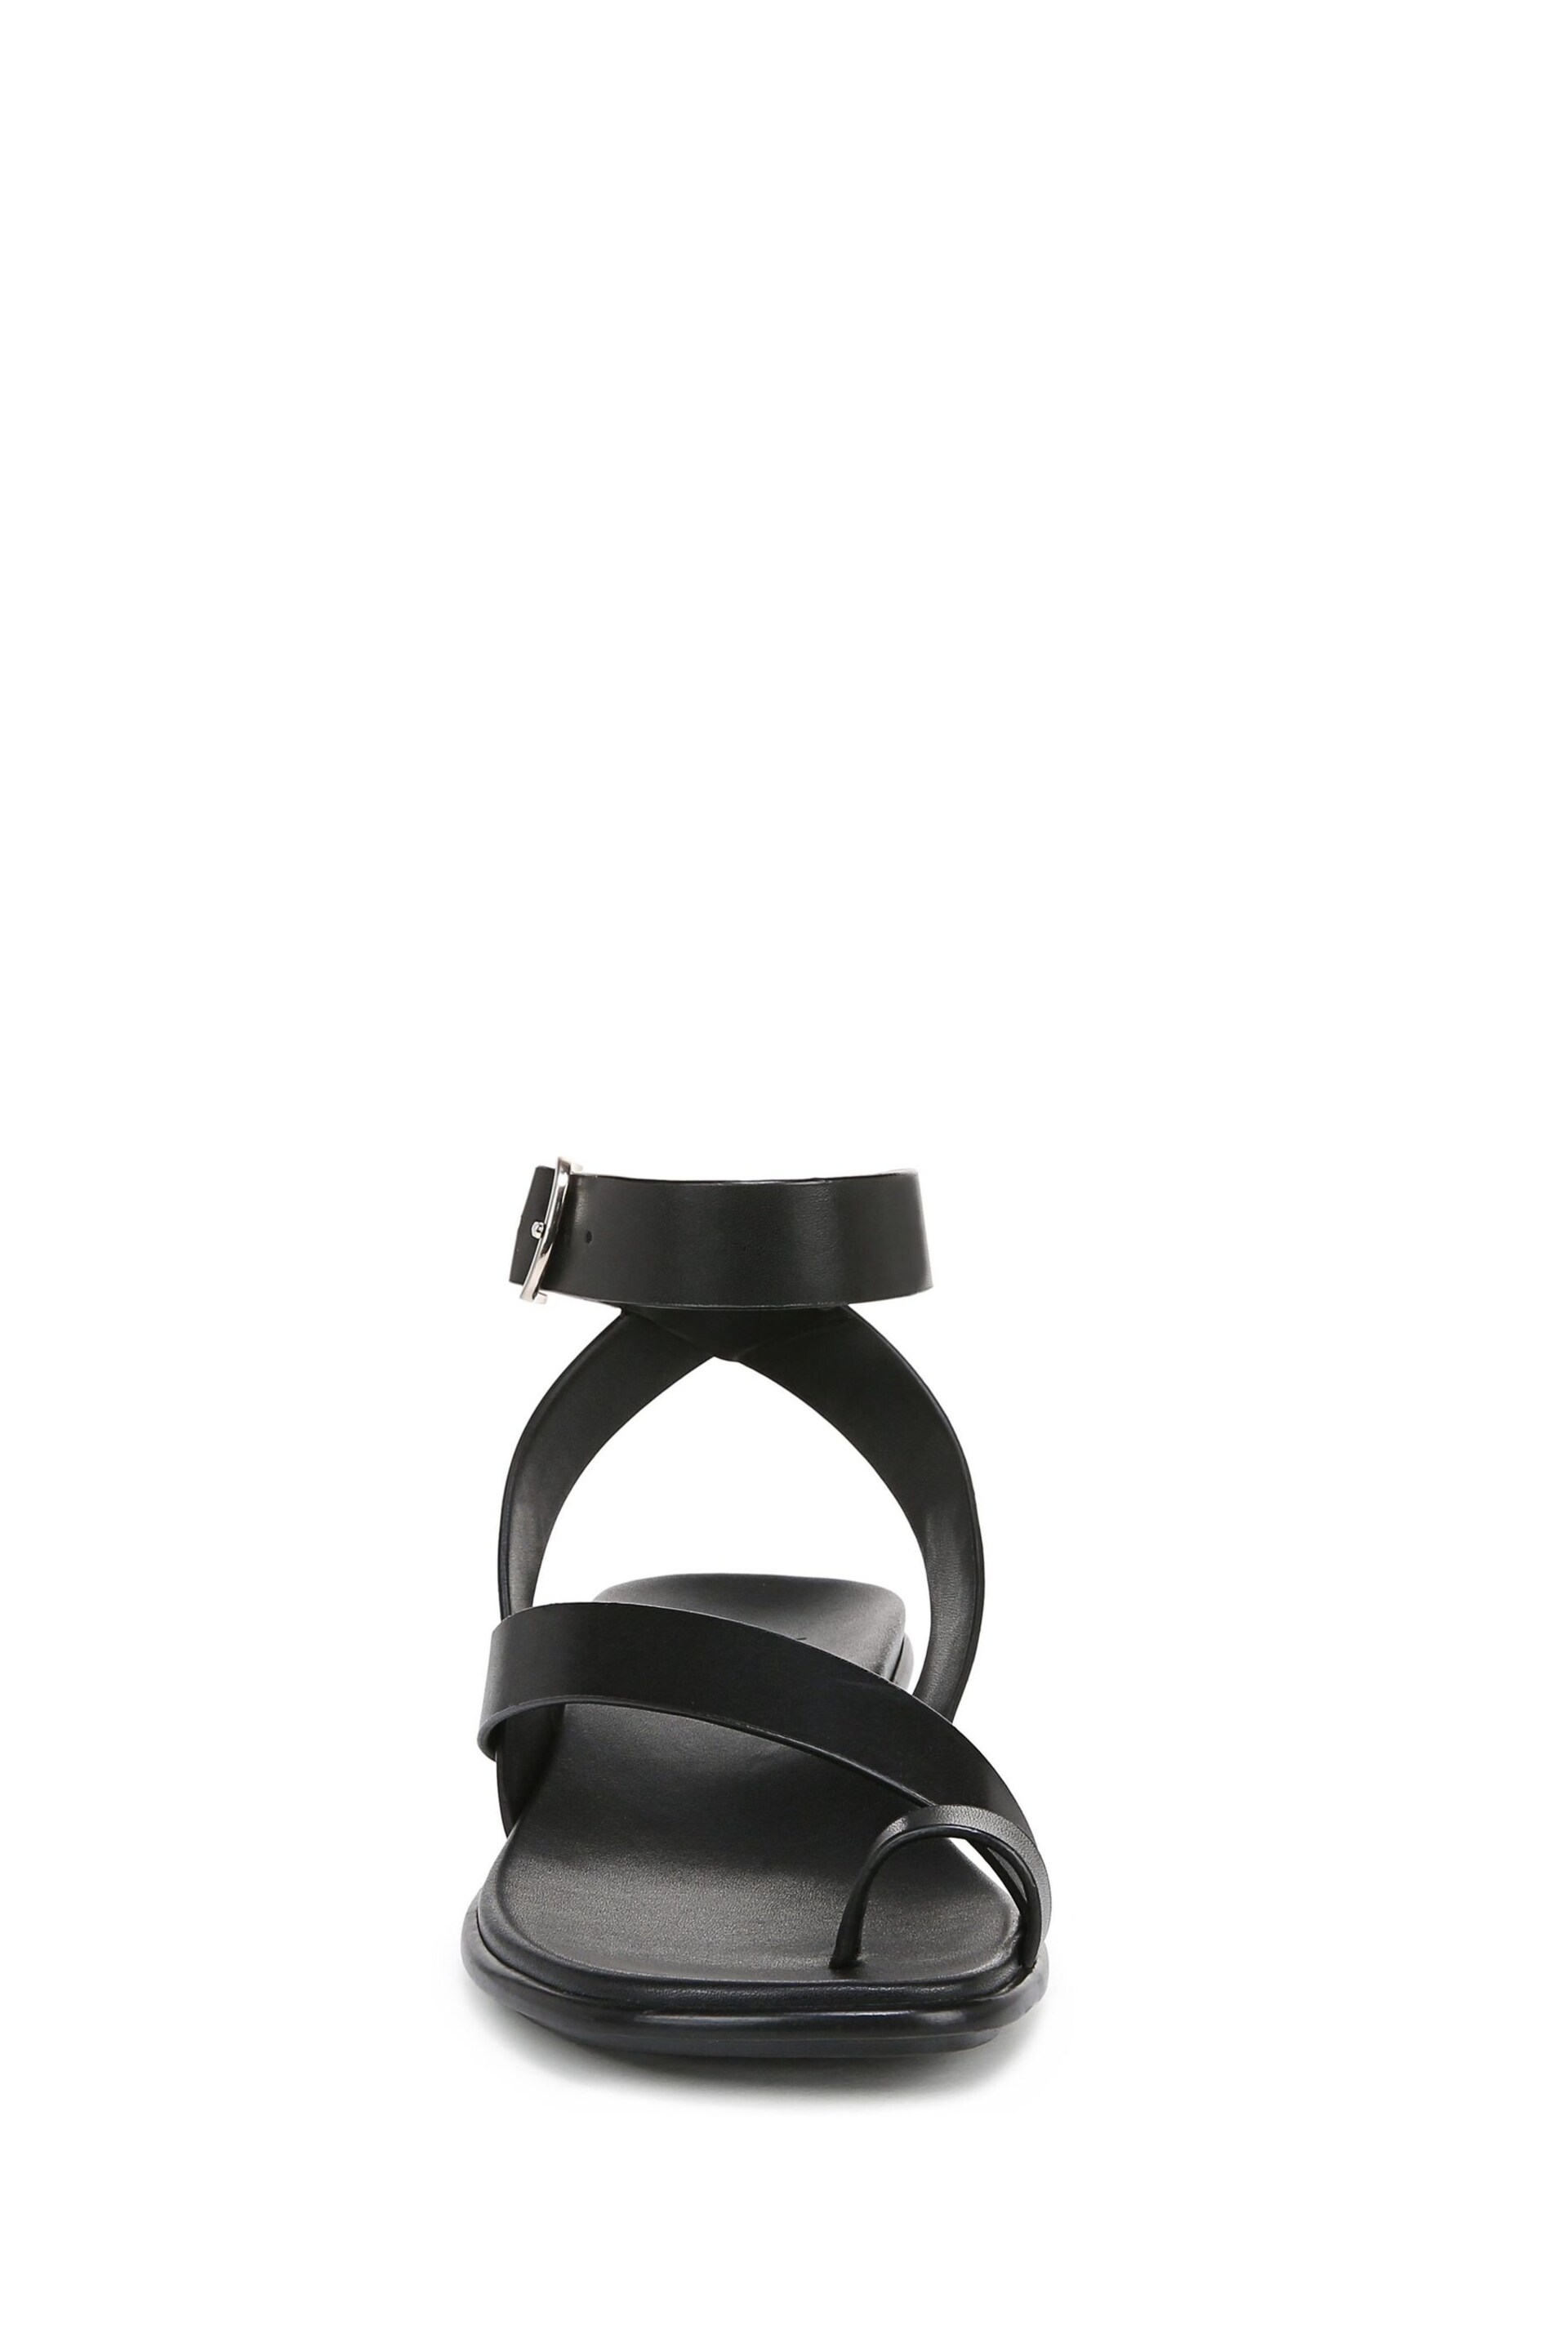 Naturalizer Birch Ankle Strap Sandals - Image 4 of 7